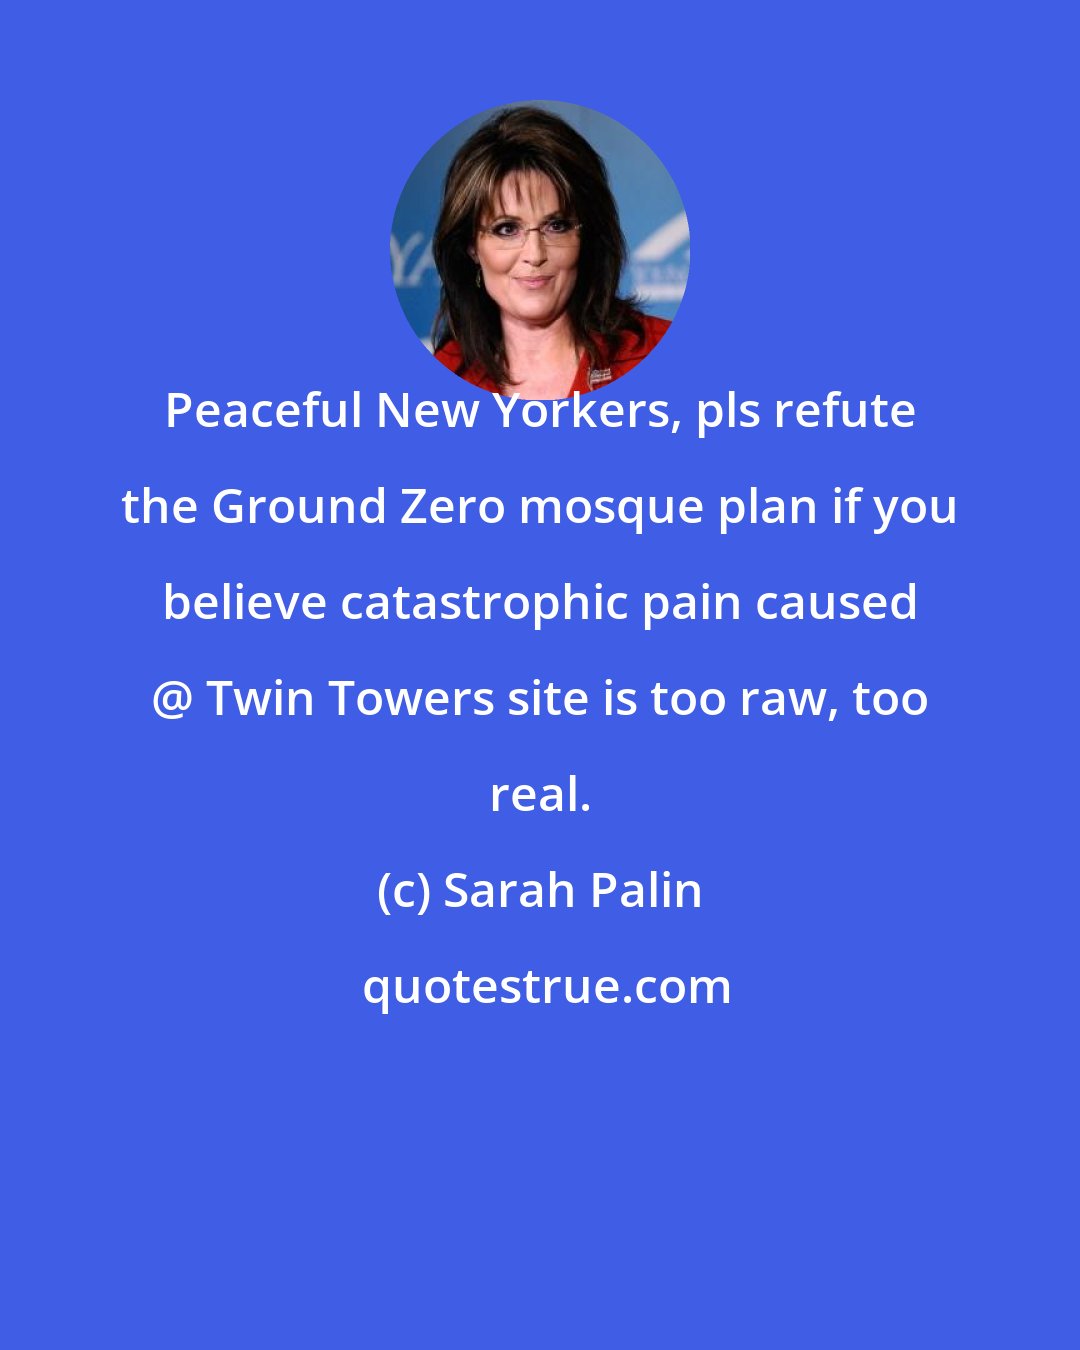 Sarah Palin: Peaceful New Yorkers, pls refute the Ground Zero mosque plan if you believe catastrophic pain caused @ Twin Towers site is too raw, too real.